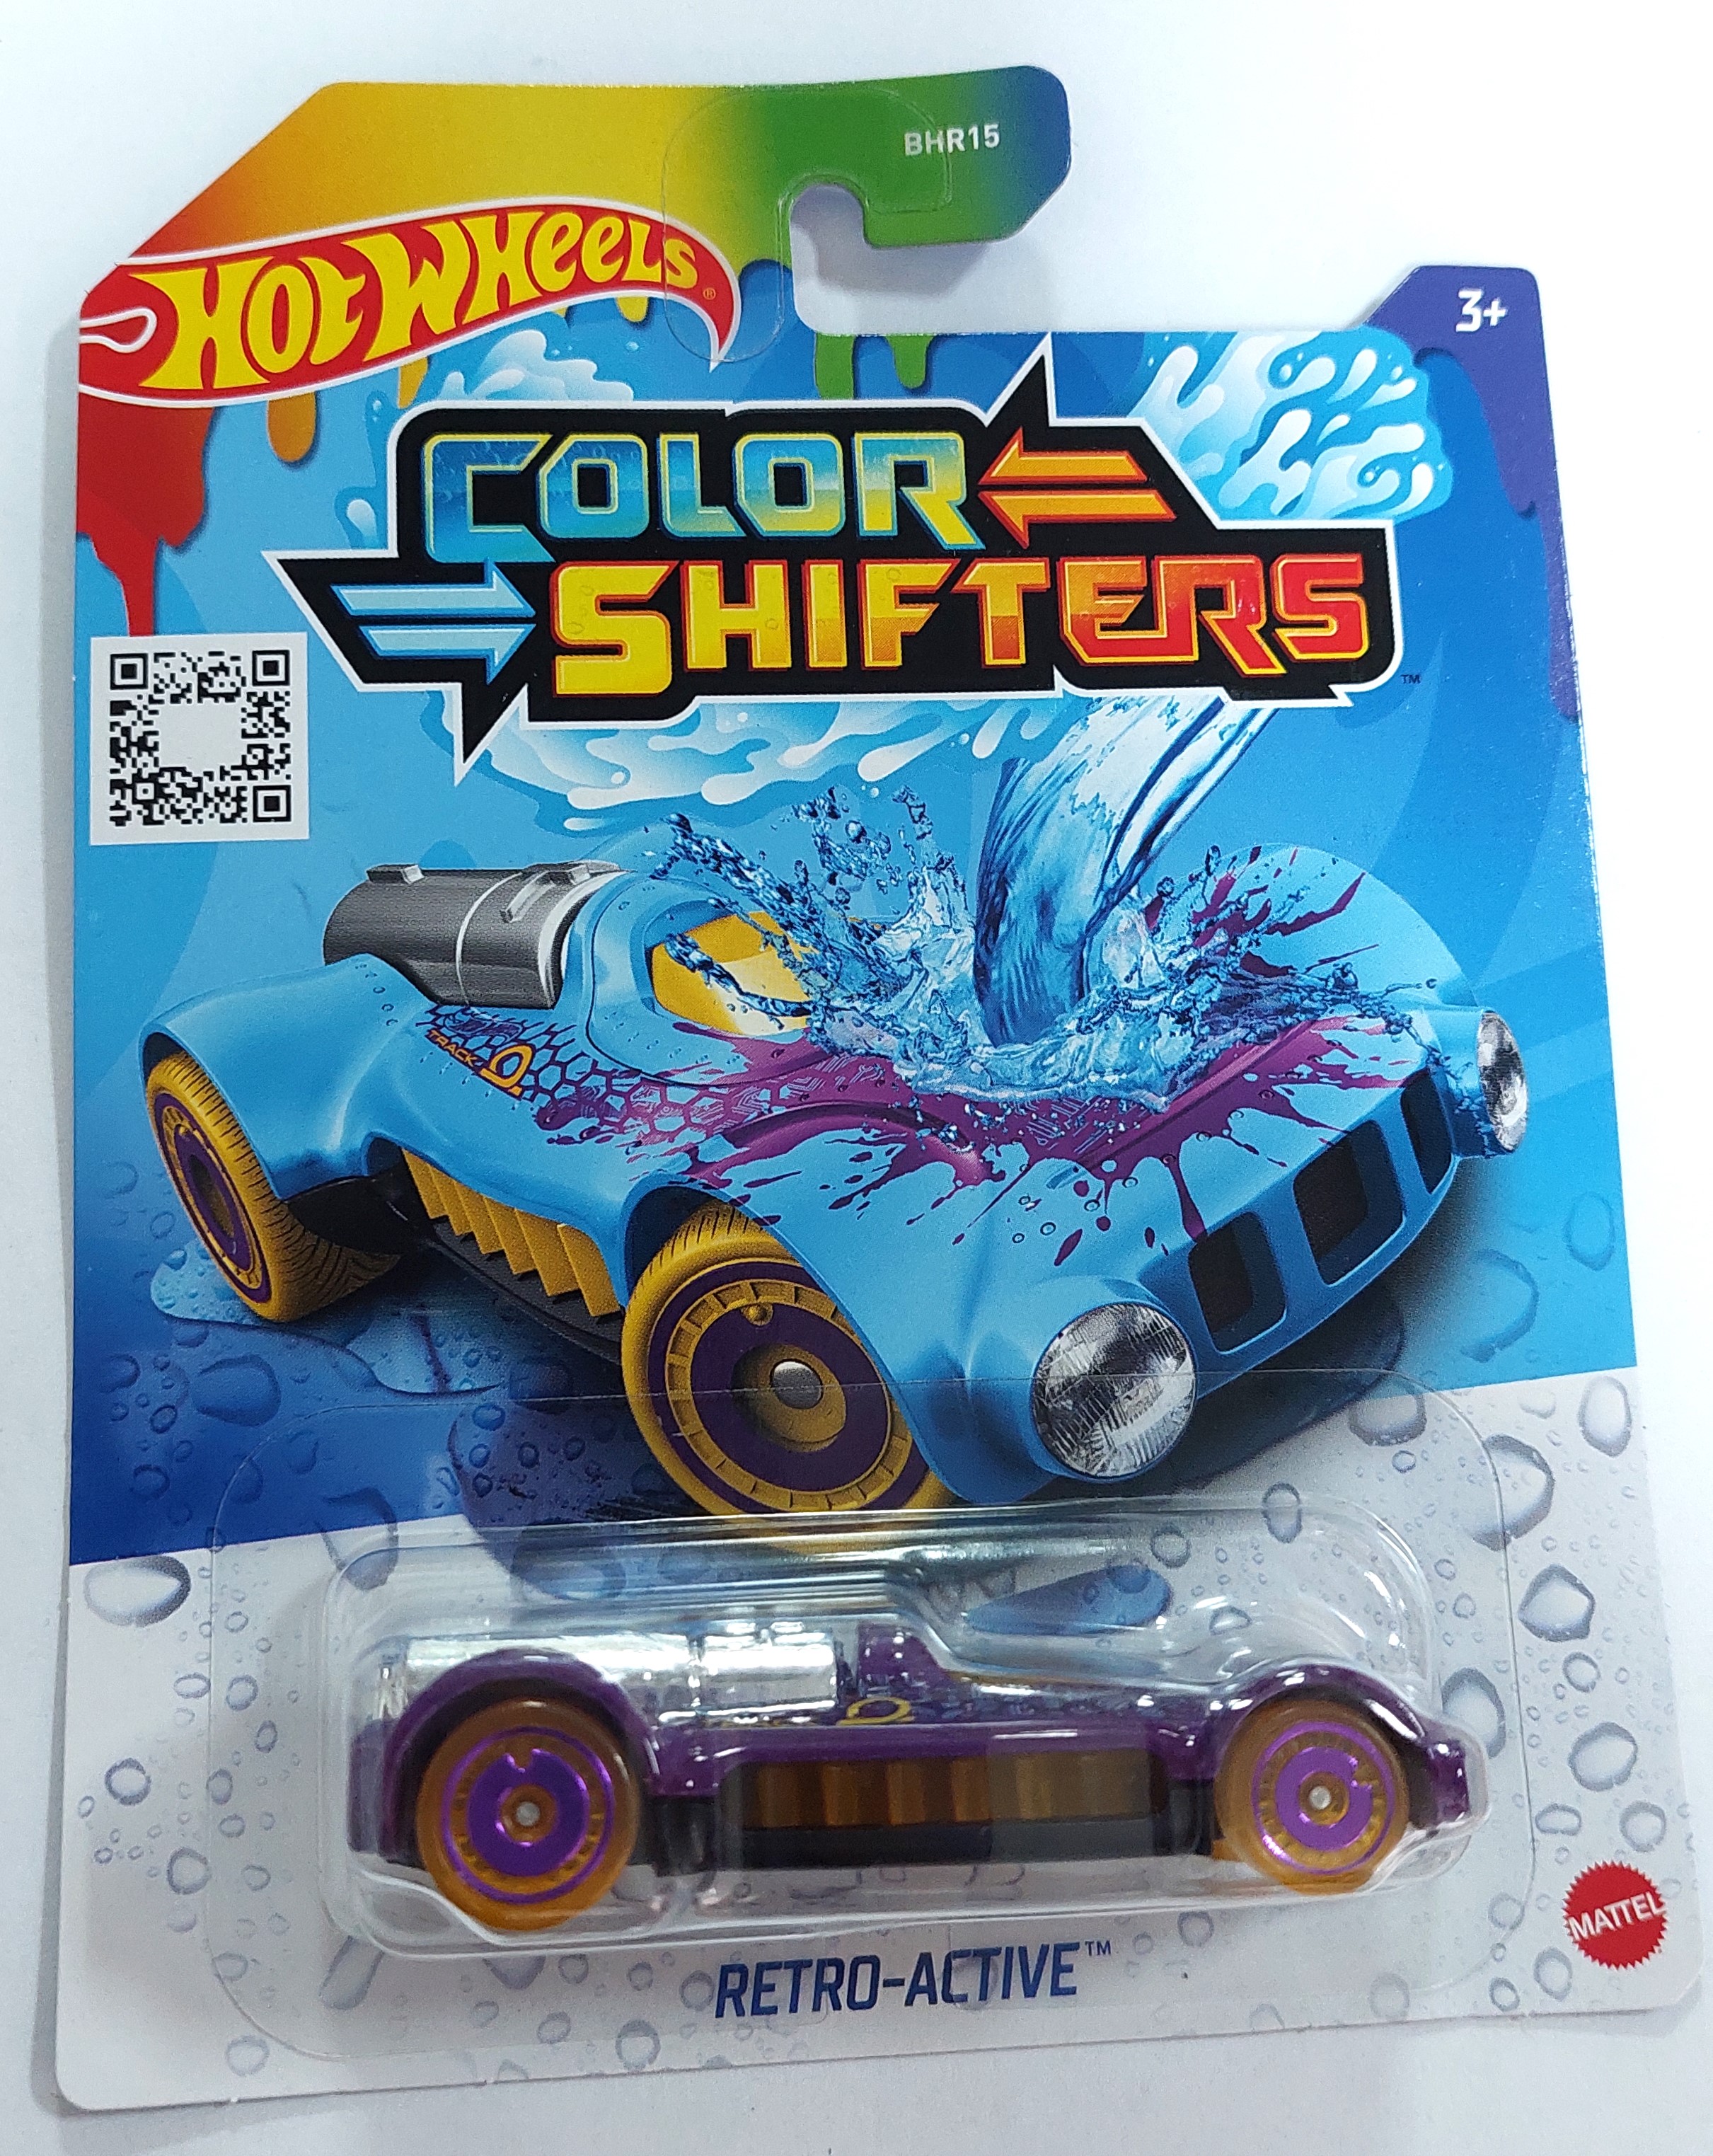 Машинка Hot Wheels Bhr15 Color Shifters Retro-active, Hxh08-la15 машинка hot wheels retro racers mazda 787b hkj79 n521